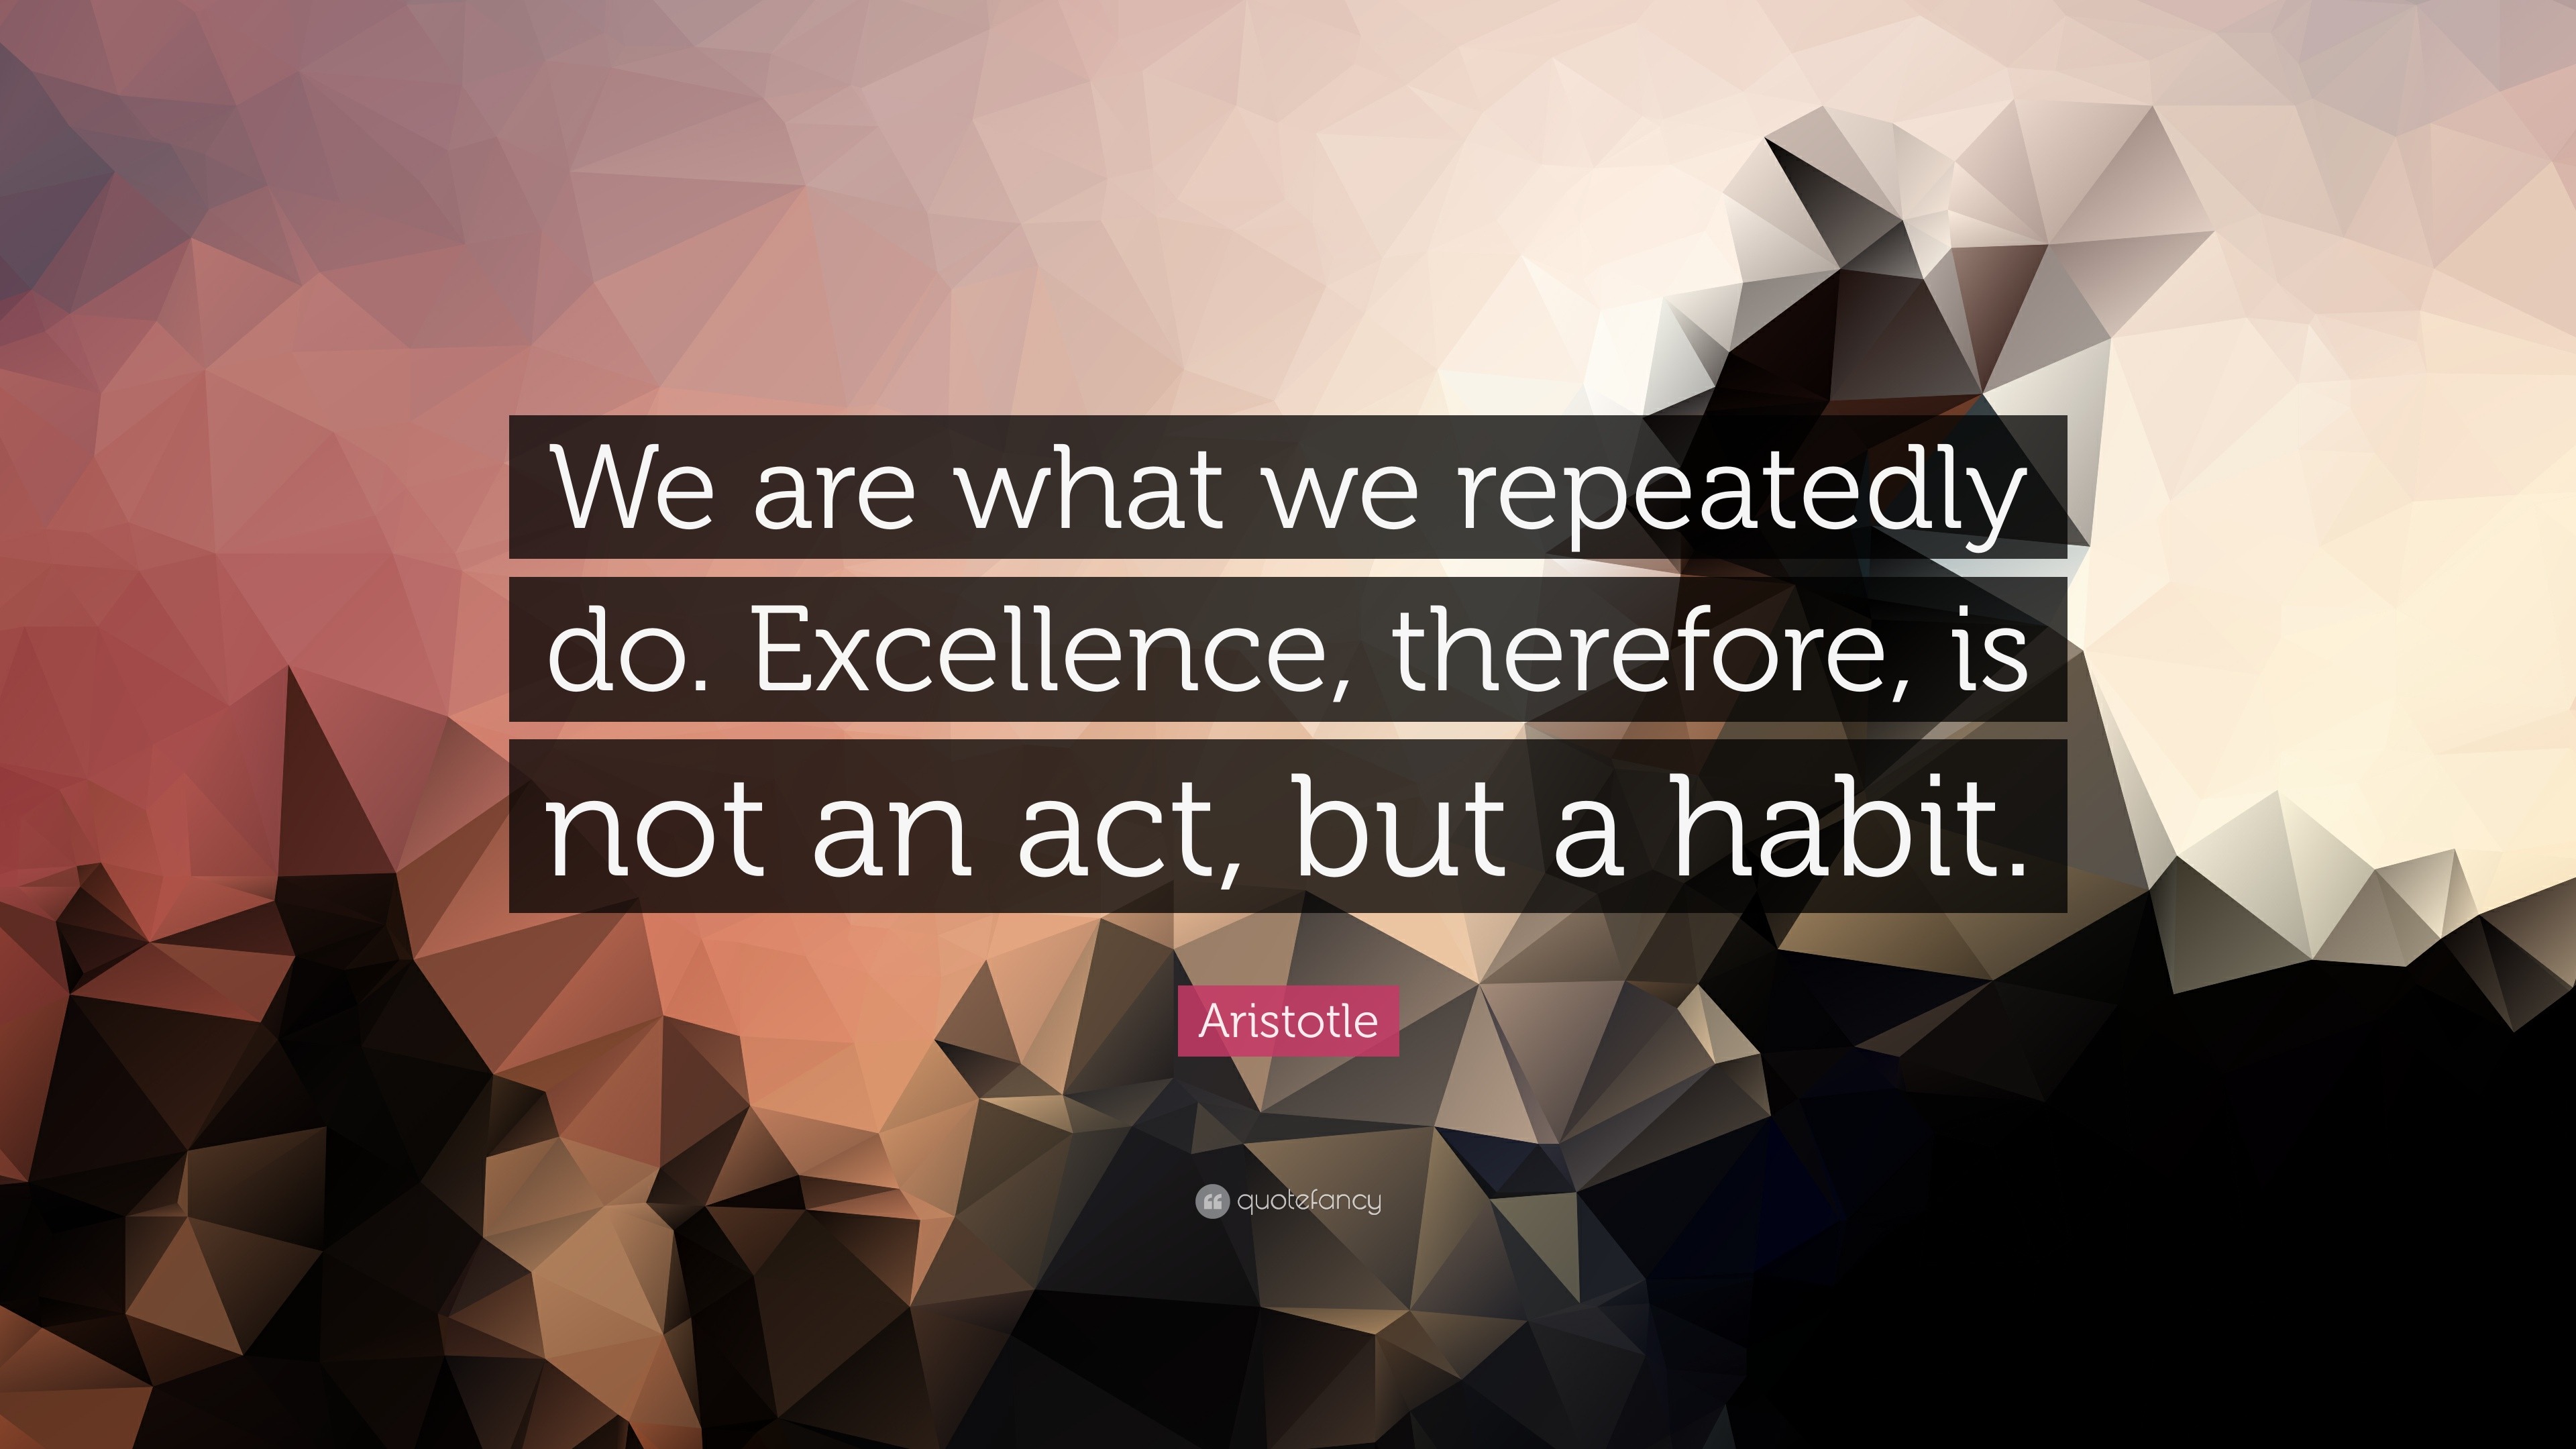 Aristotle Quote: “We are what we repeatedly do. Excellence, therefore